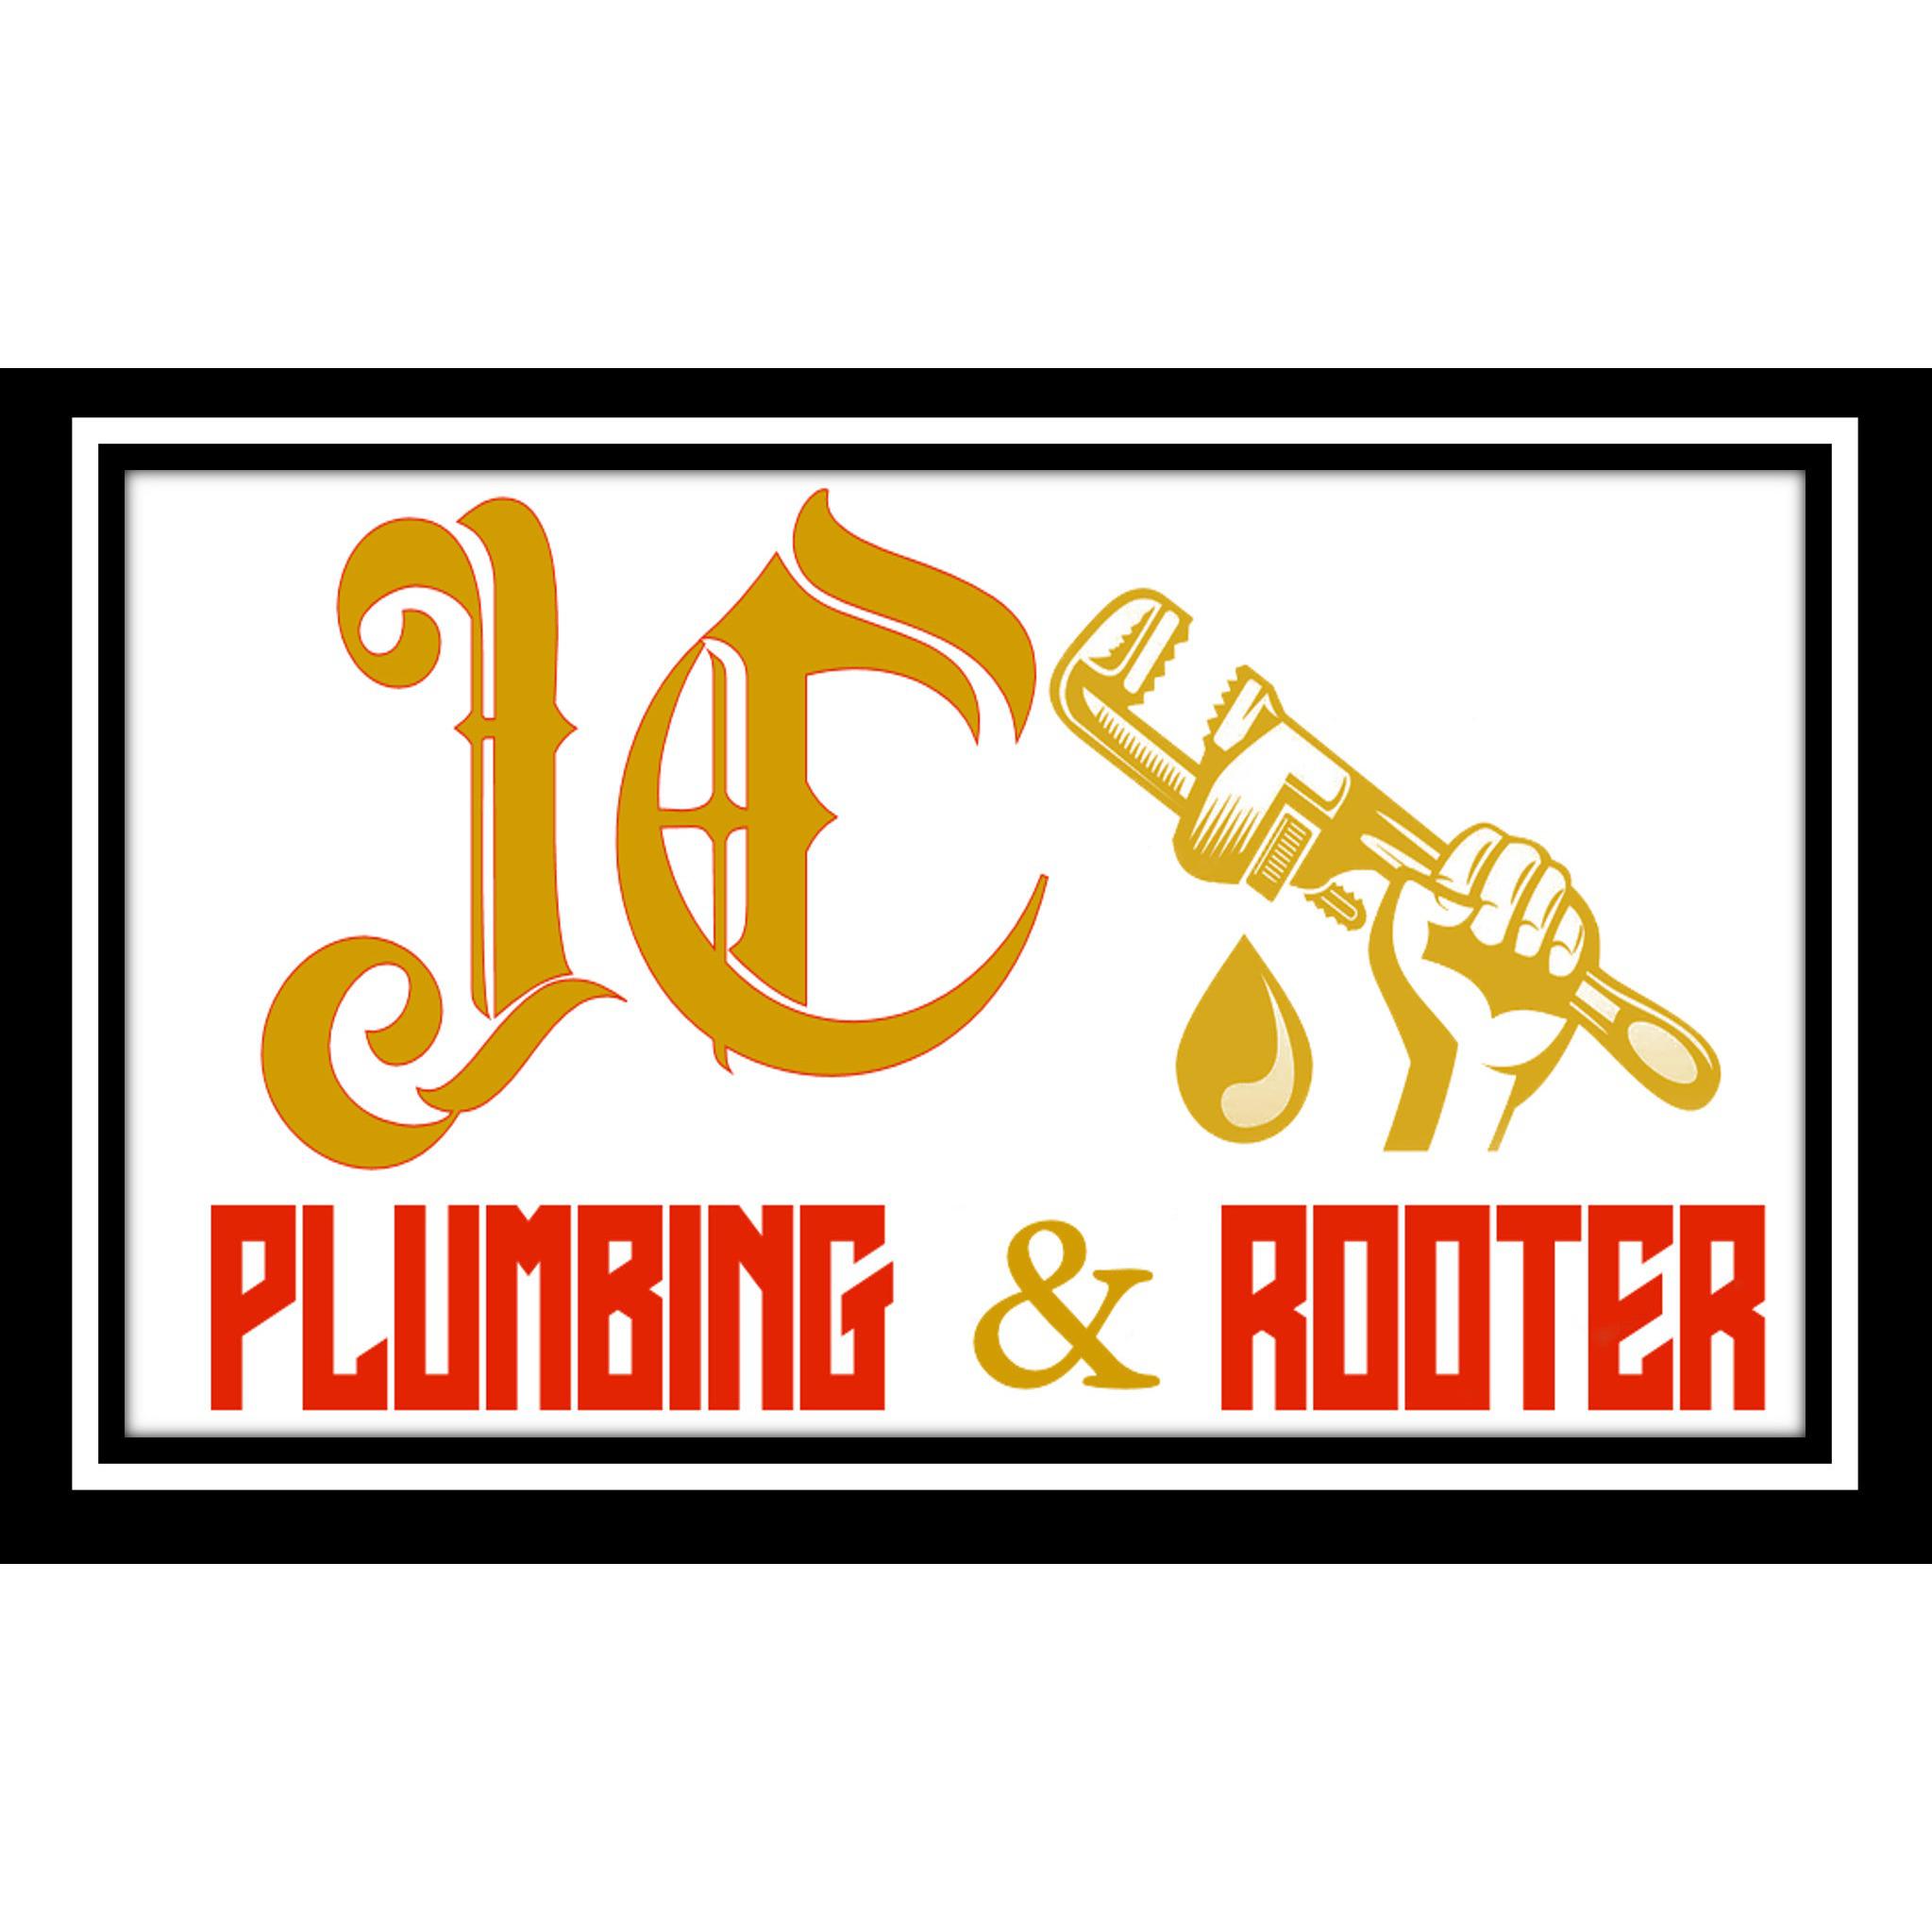 JC Plumbing & Rooter - Hayward, CA 94541 - (415)947-9675 | ShowMeLocal.com